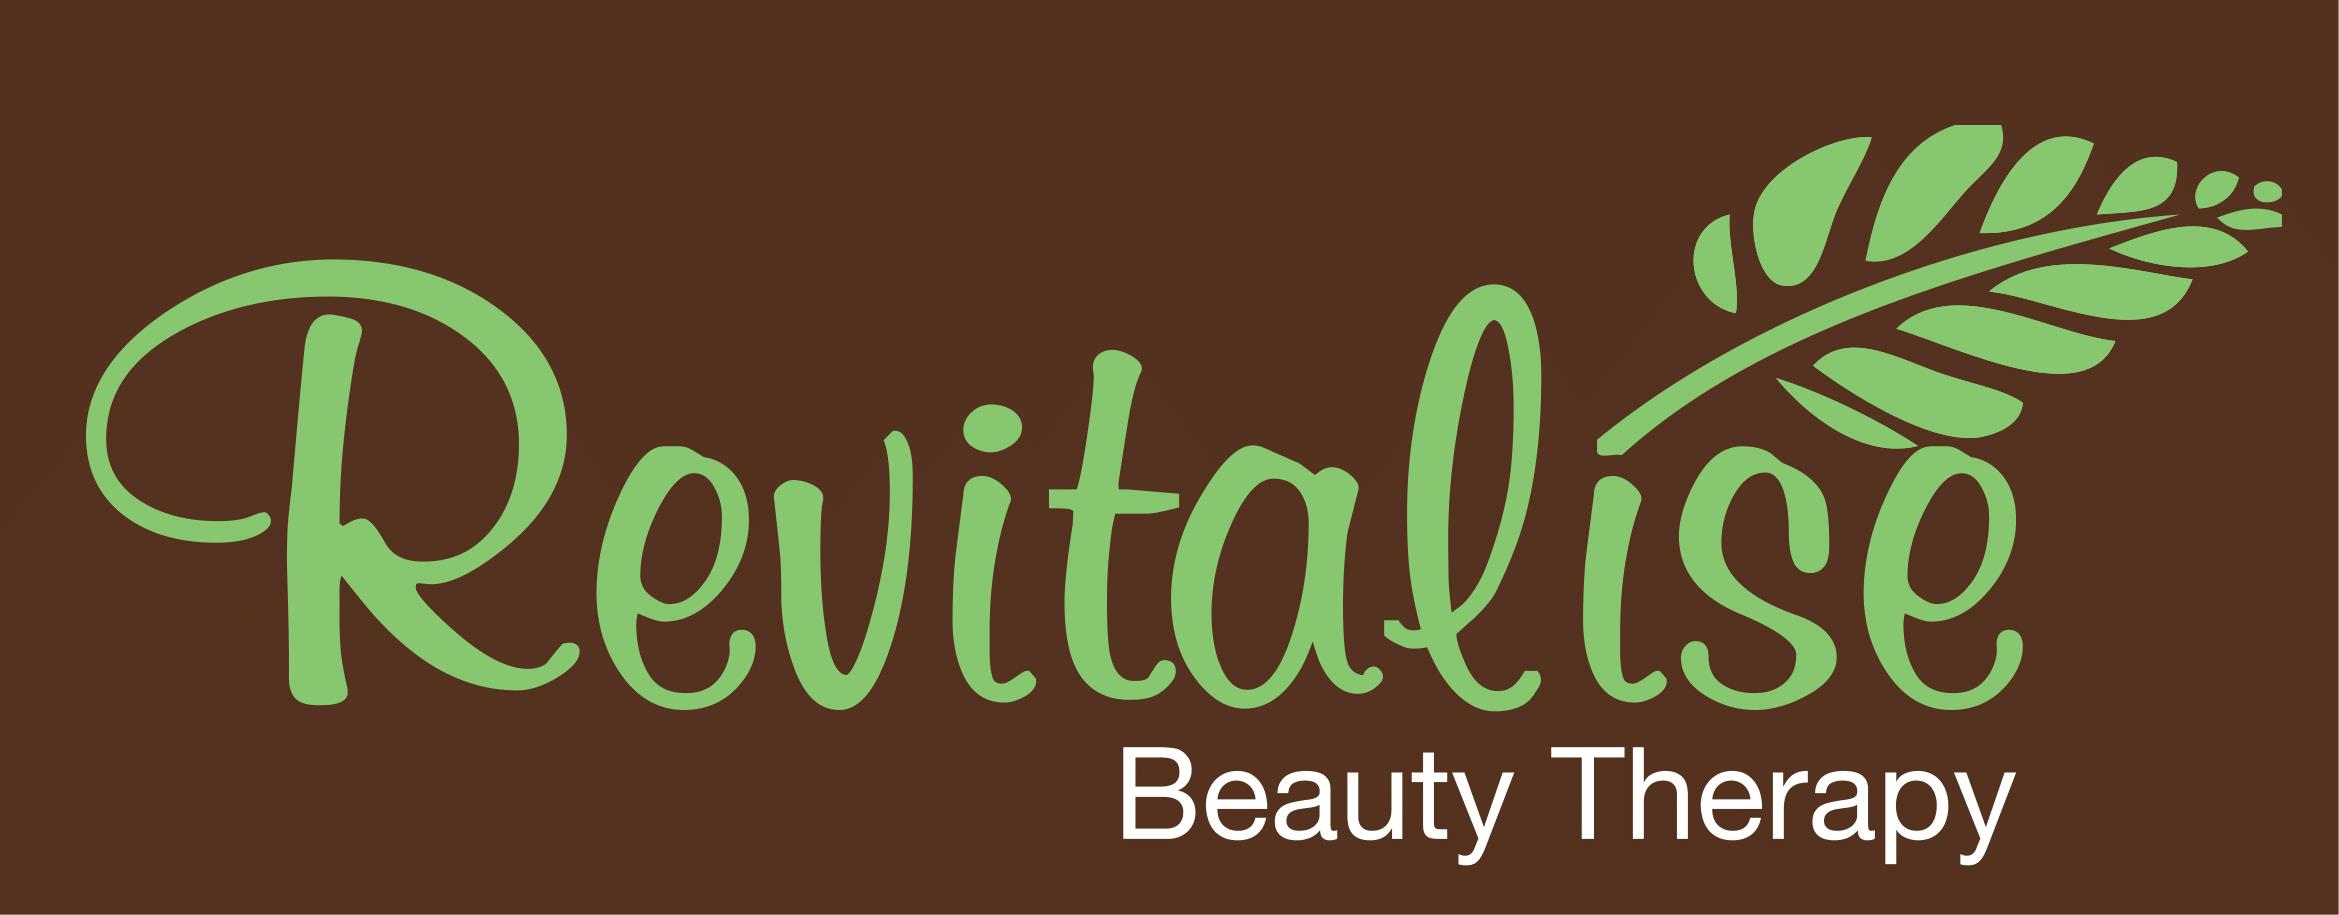 Revitalise Beauty Therapy